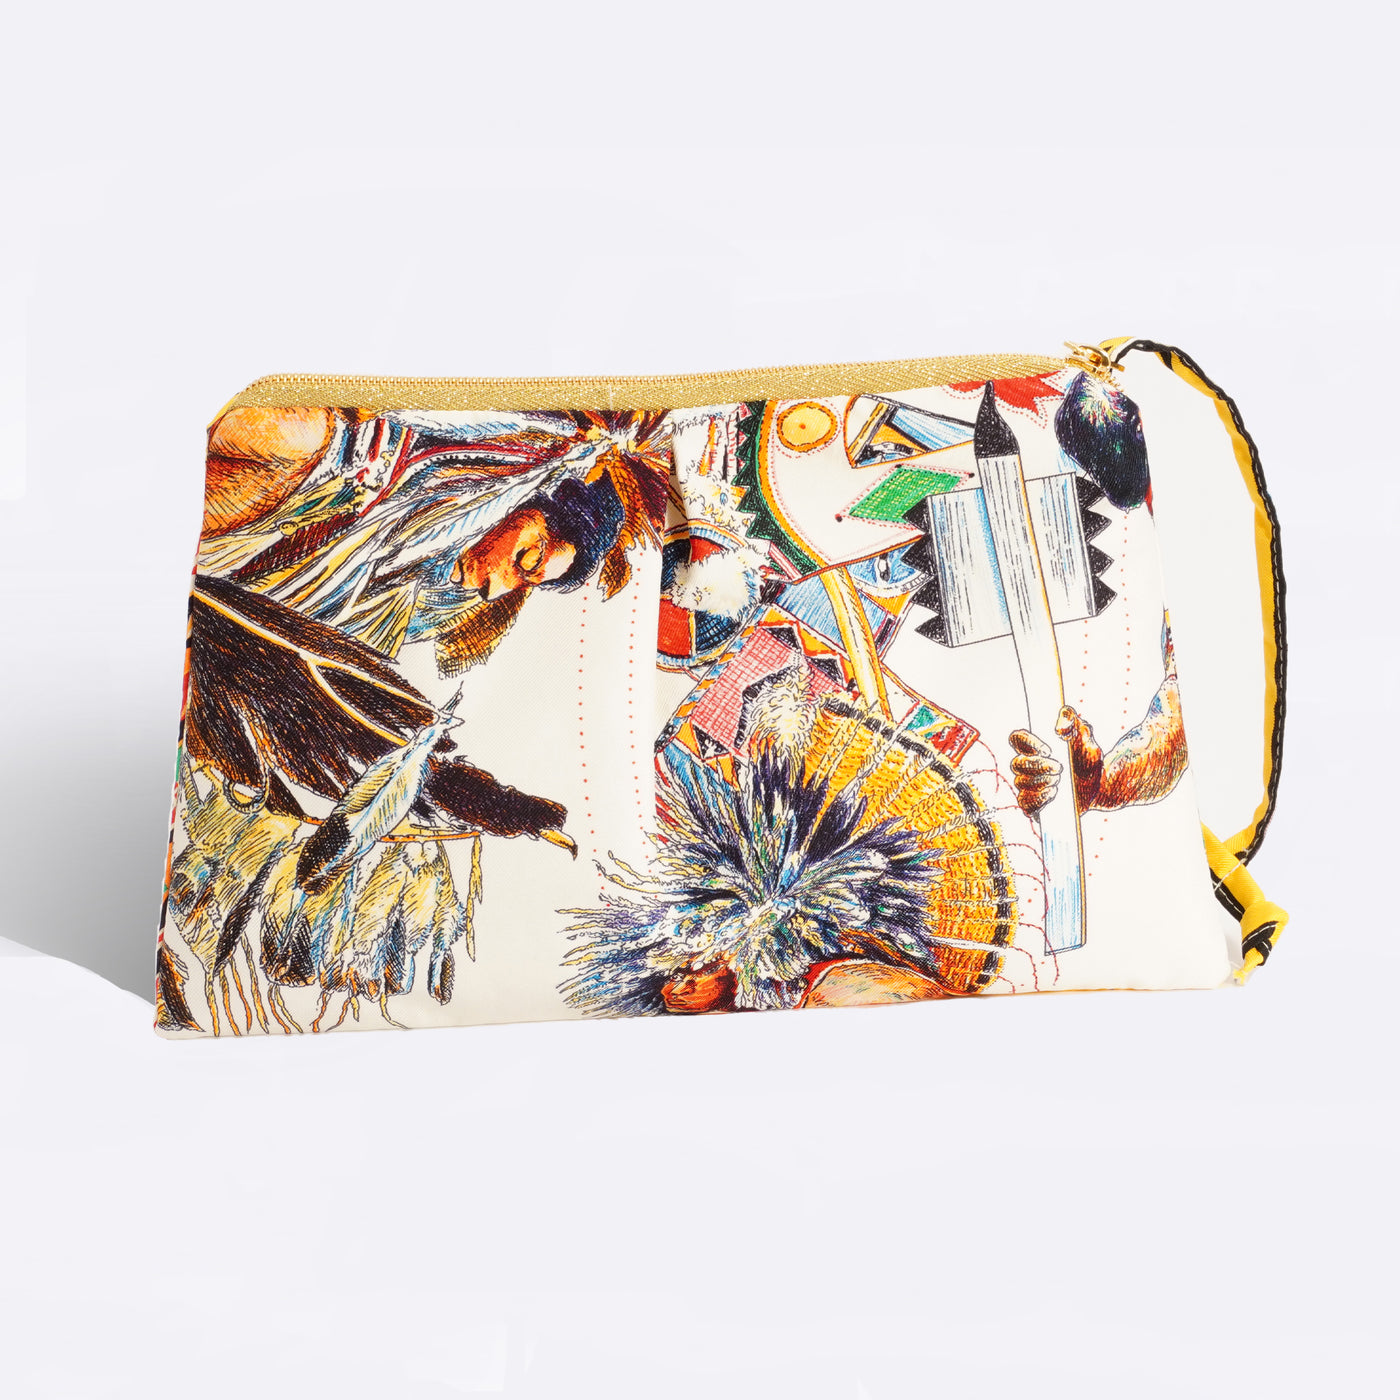 "Des Indiens" Scarf Bag (Upcycled from Hermes Scarf) Party Clutch Hampton Road Designs   